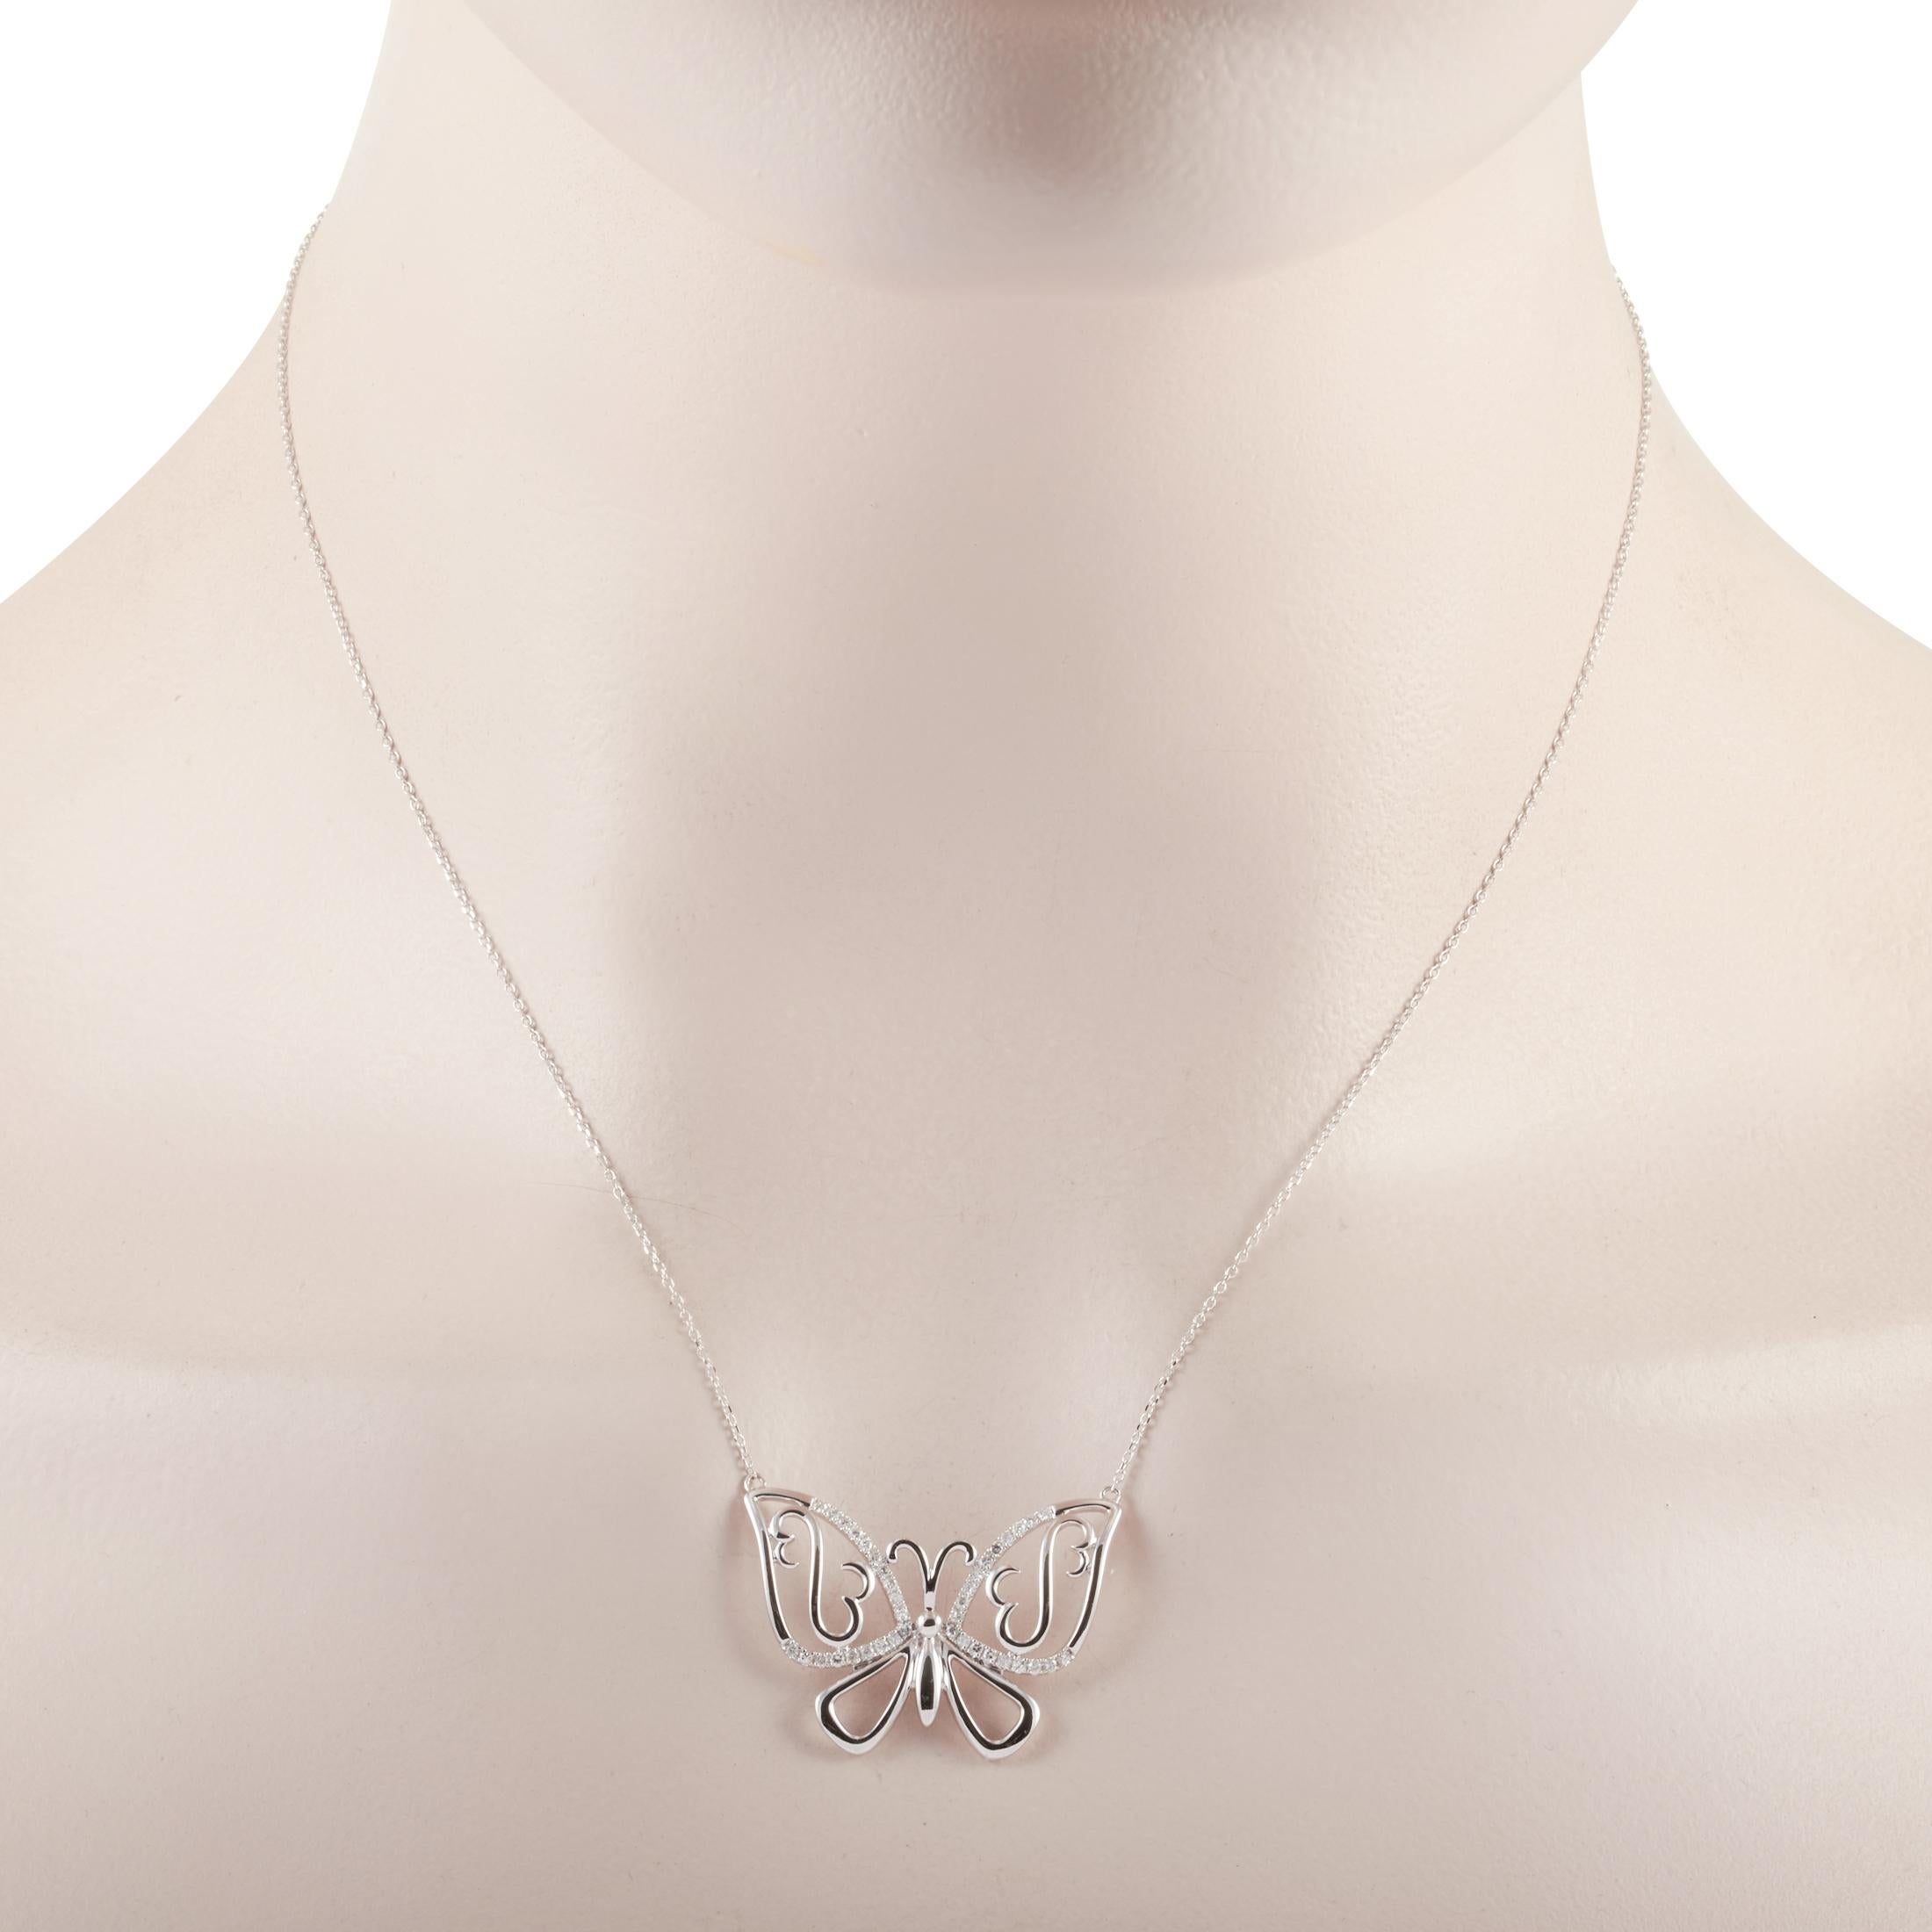 This LB Exclusive necklace is crafted from 14K white gold and weighs 4.2 grams. It is presented with a 15” chain and boasts a butterfly pendant that measures 0.88” in length and 1.13” in width. The necklace is set with diamonds that total 0.25